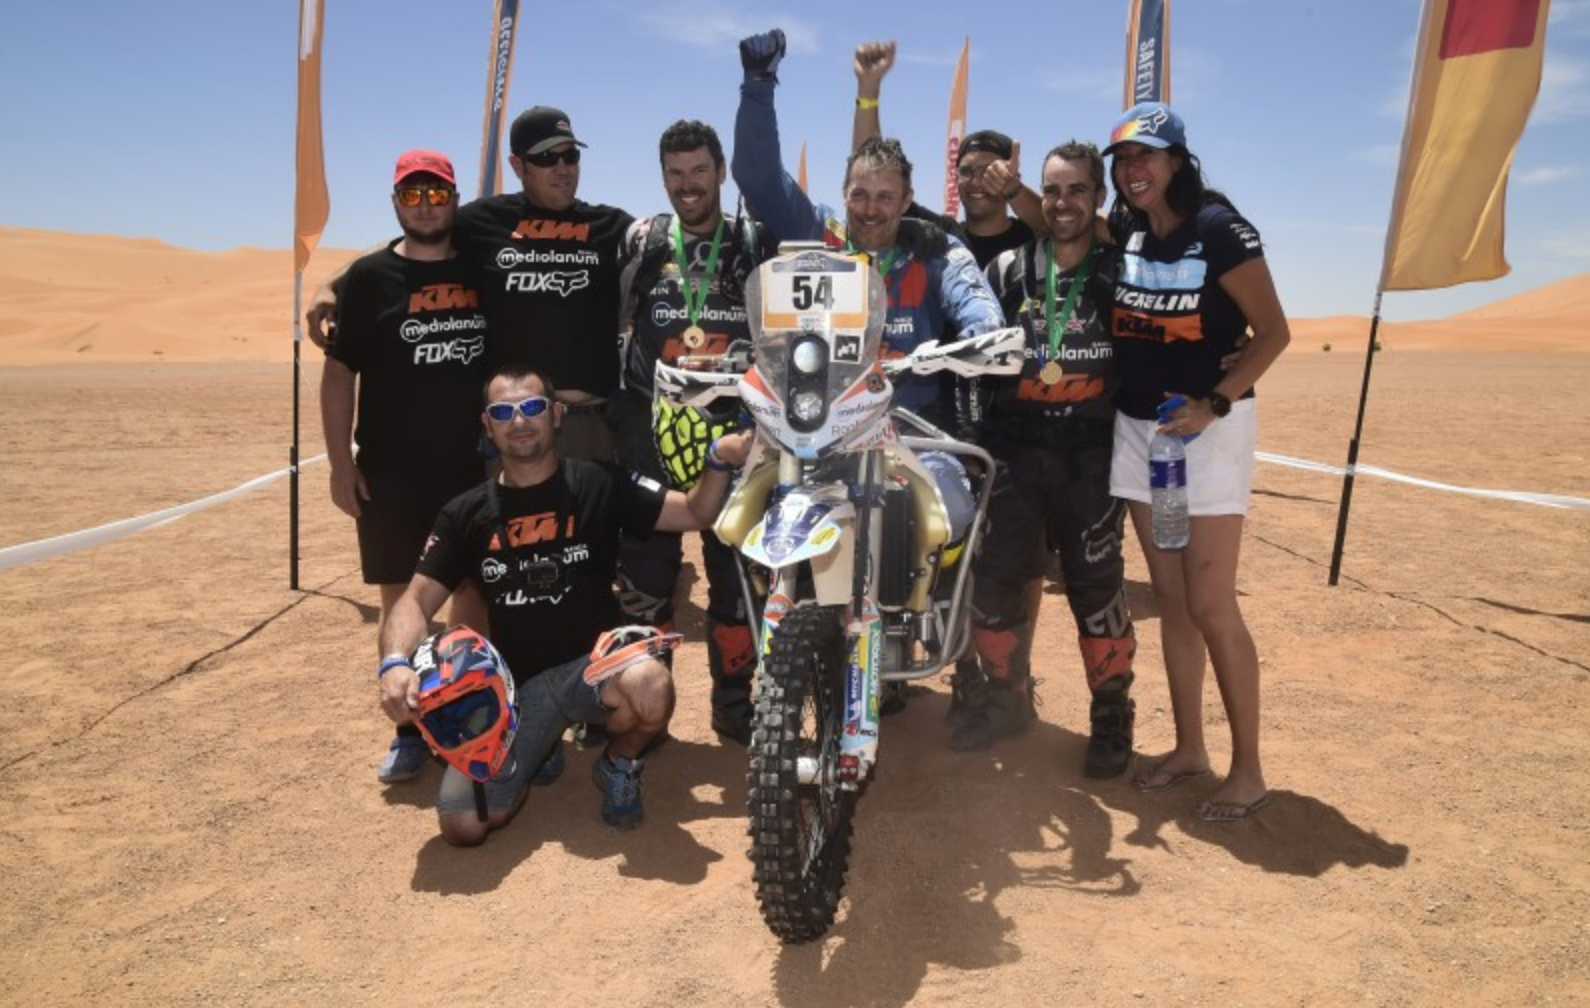 Nicola Dutto and his team after a race, with him sitting on his motorcycle accommodated to allow him to race as a paraplegic. 